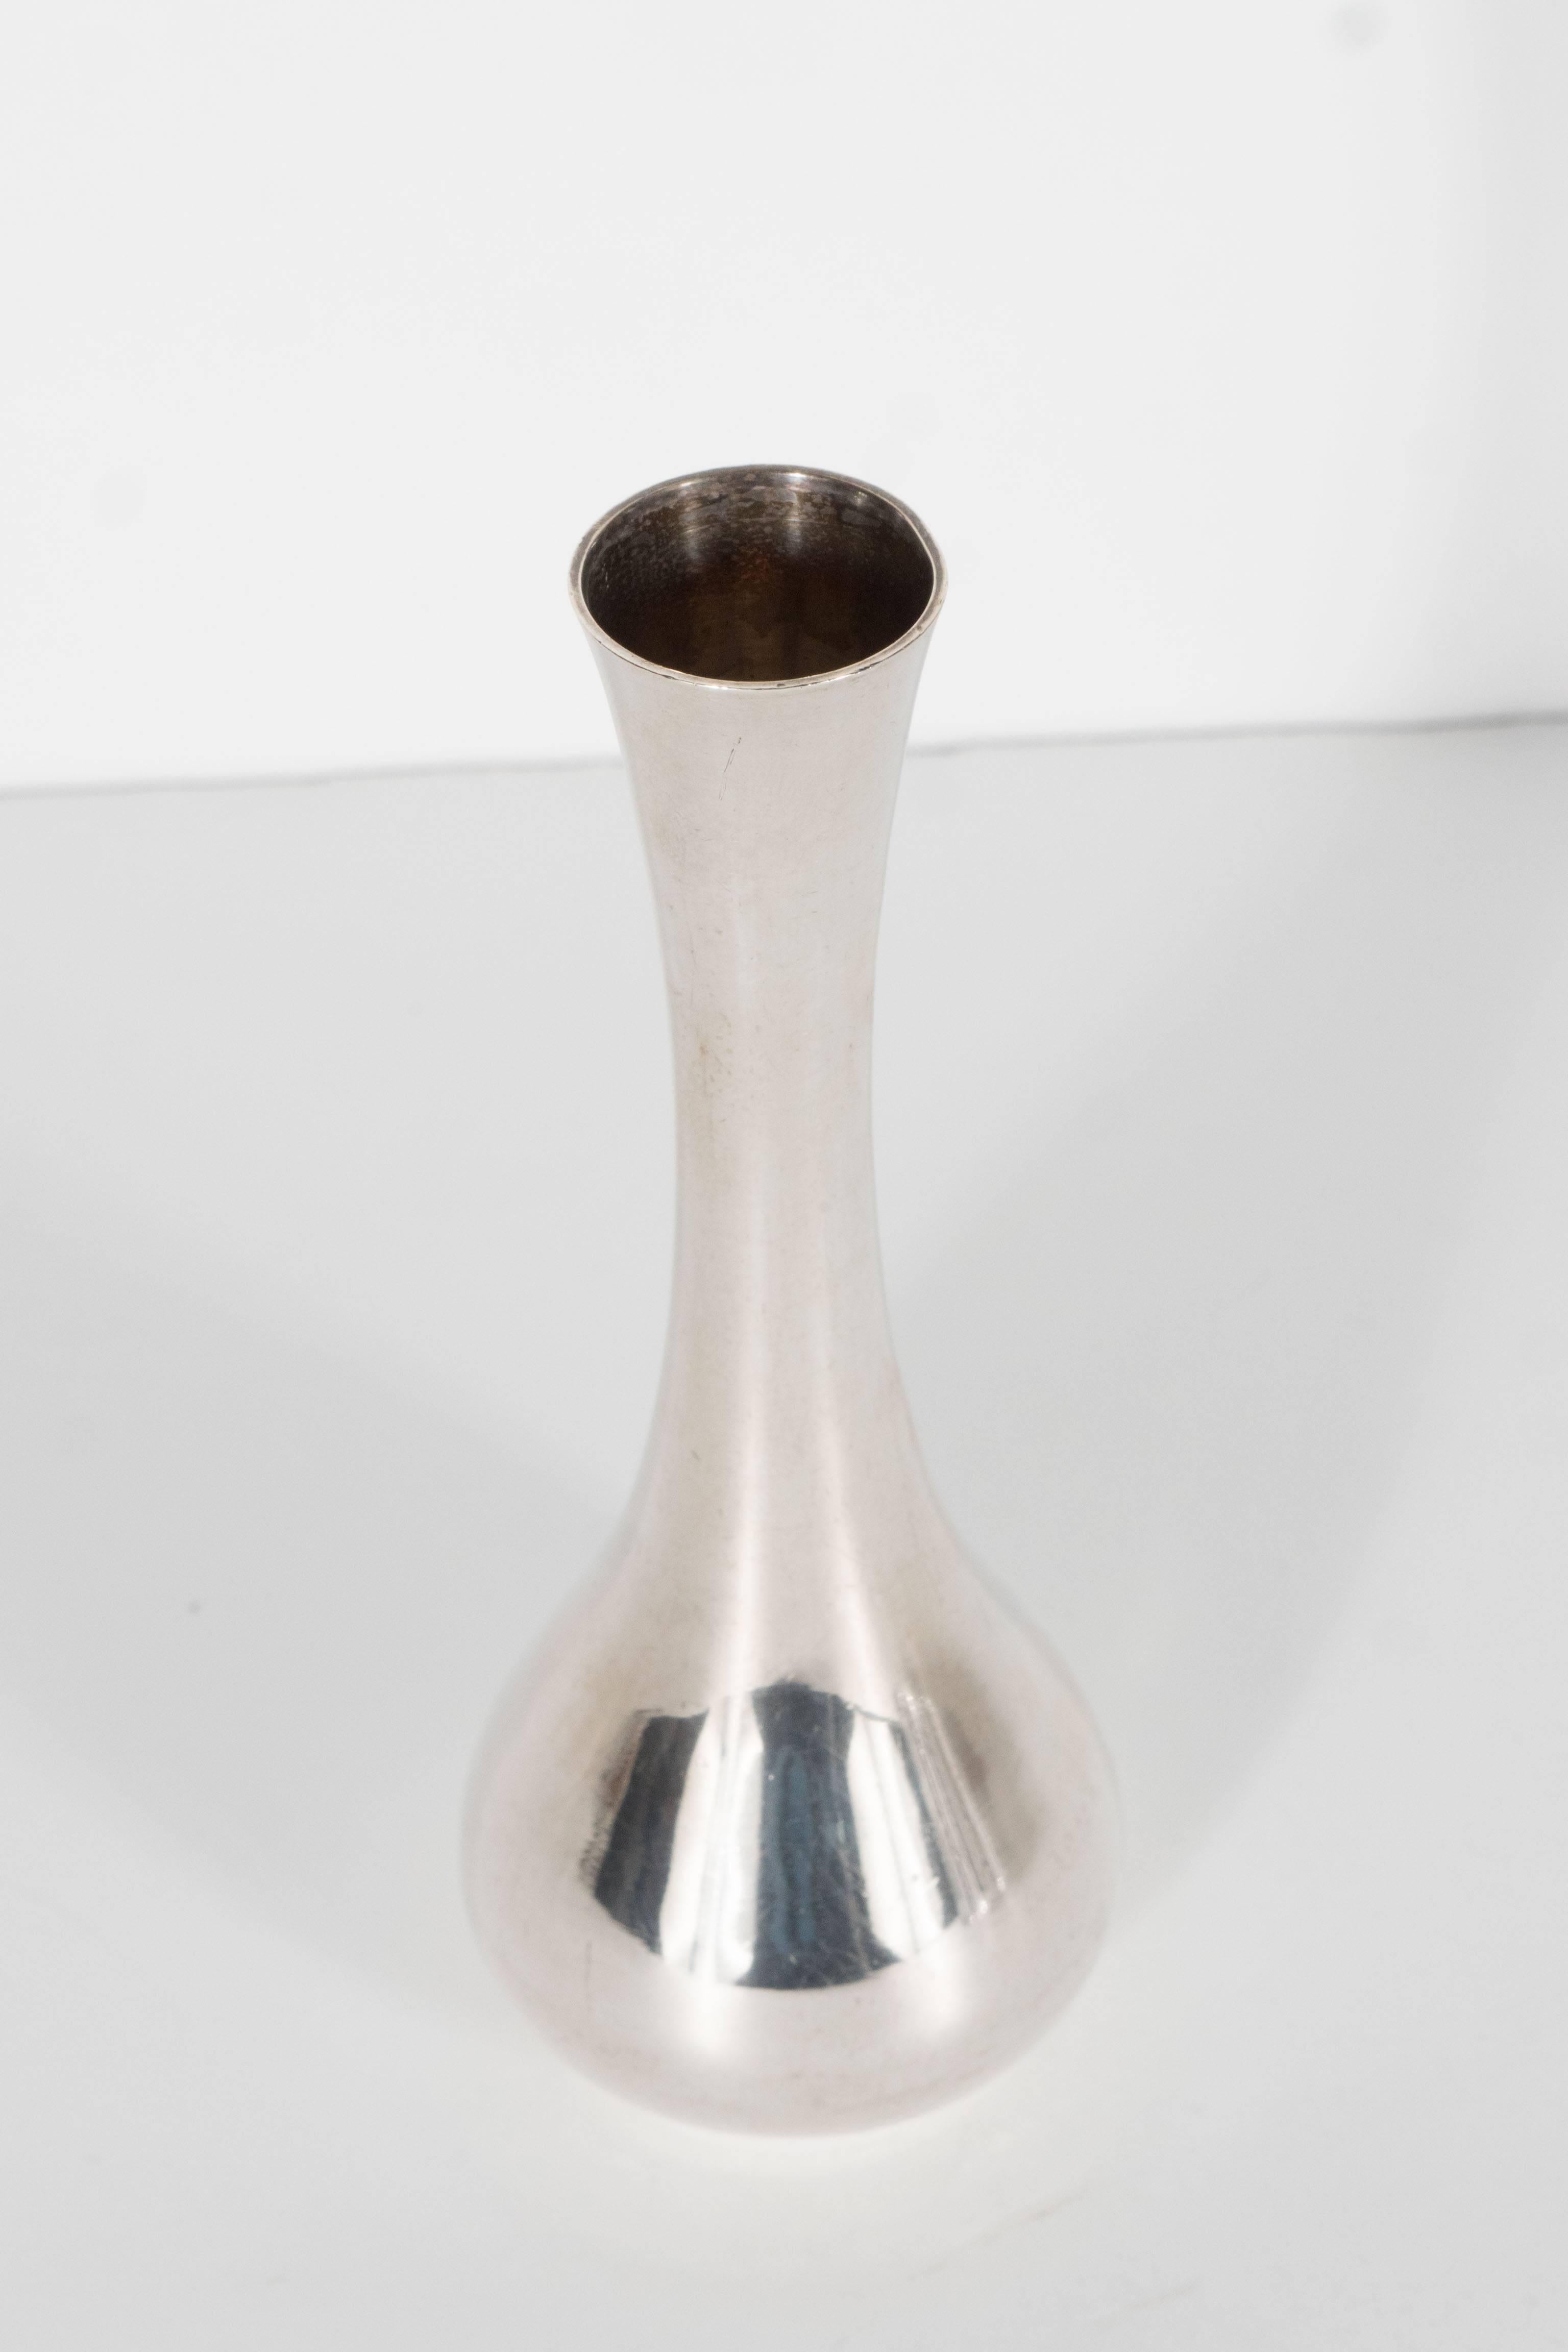 This stunning sterling silver bud vase has a nice heavy weight and features a clean stylized hour glass form design. It would be a great accent piece and also functional as a bud vase it bears the Tiffany sterling mark on the bottom.